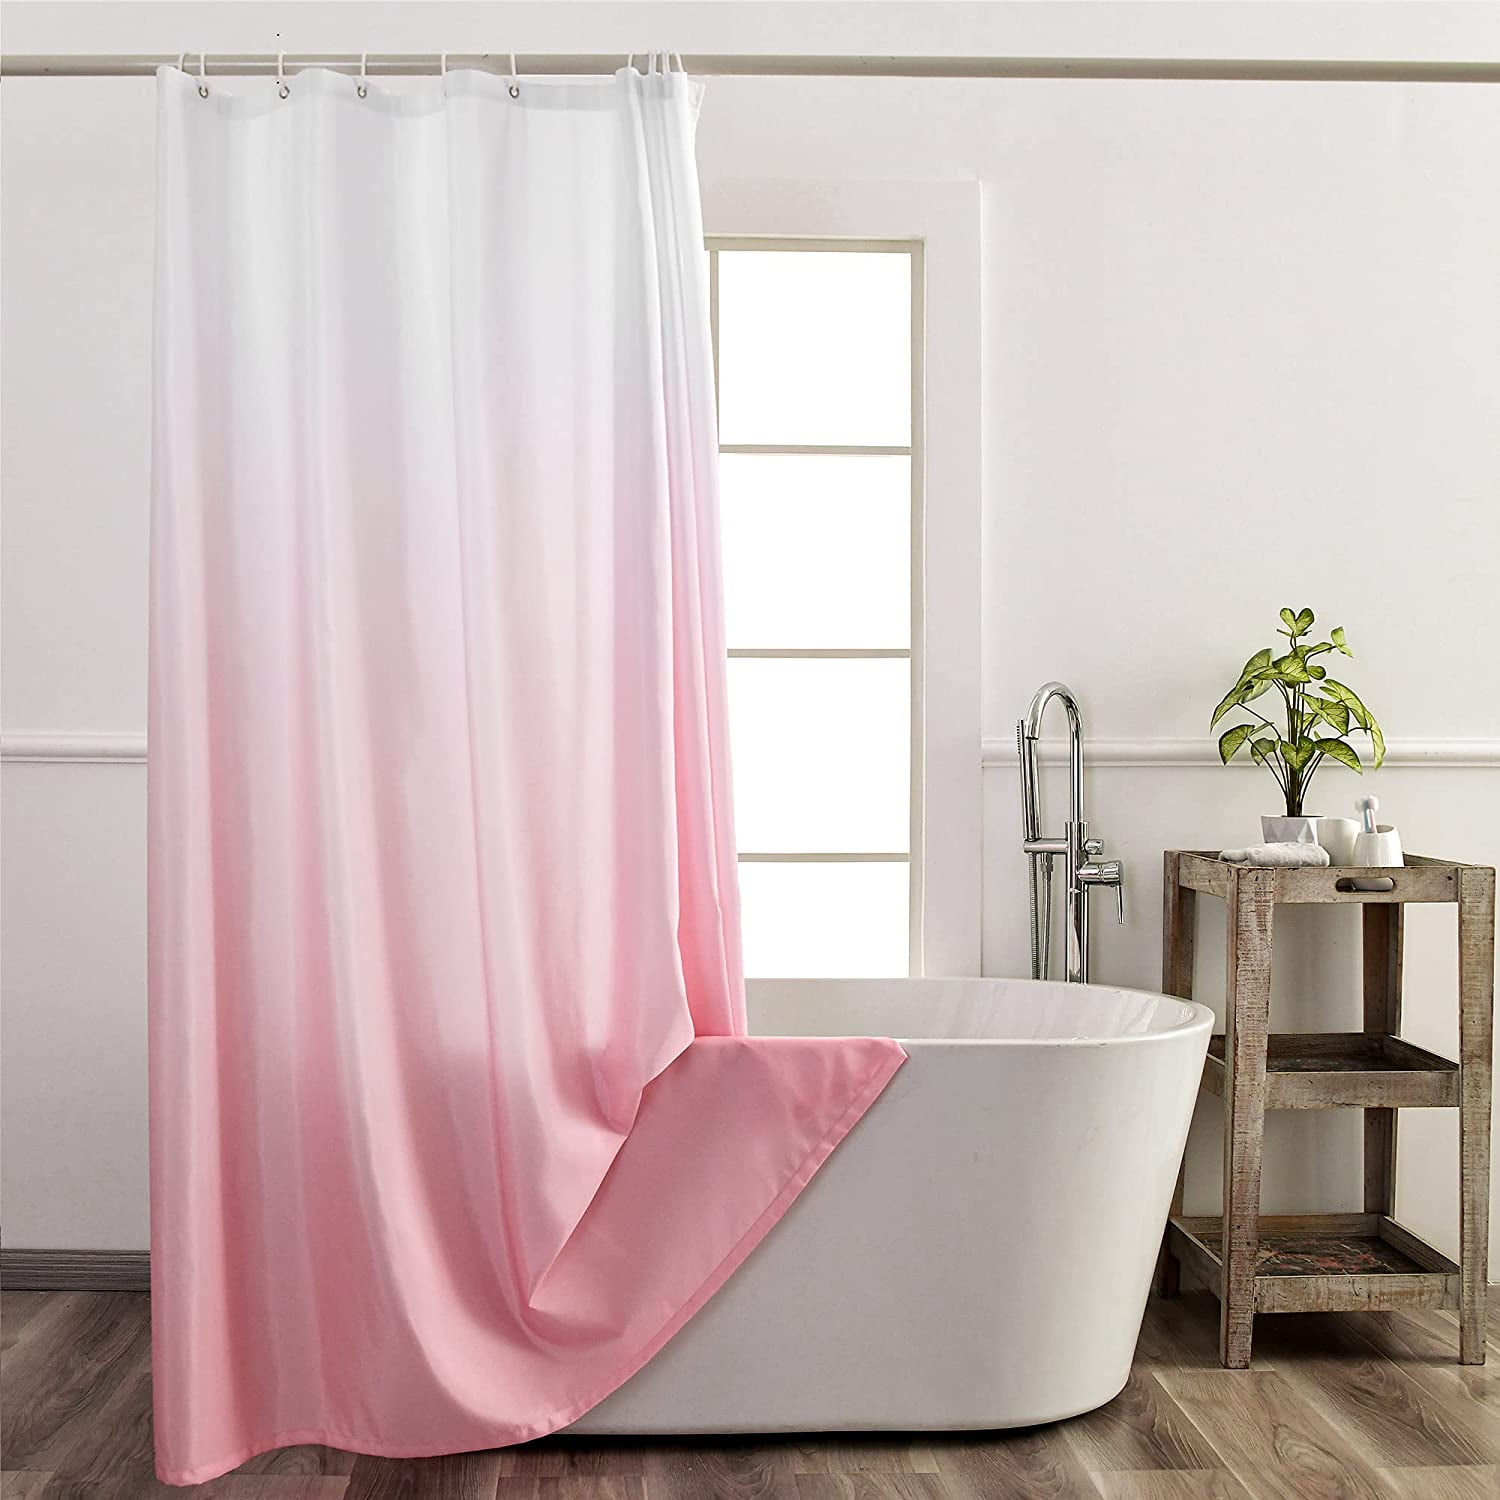 Ombre Pink Shower Curtain Sets for Bathroom Accessories Fabric